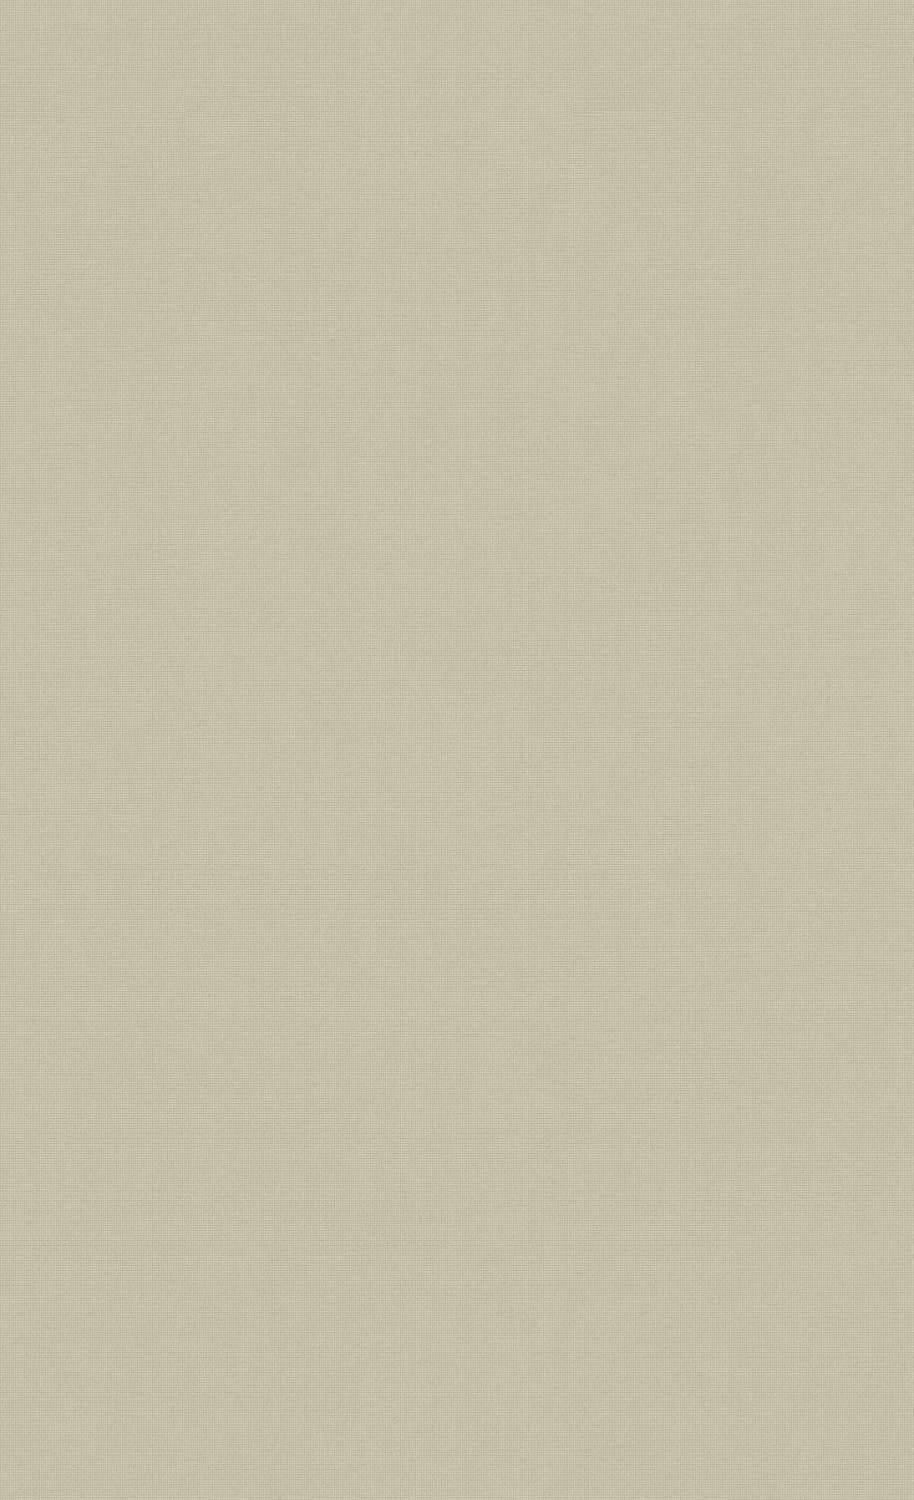 Pale Aesthetic Beige Background